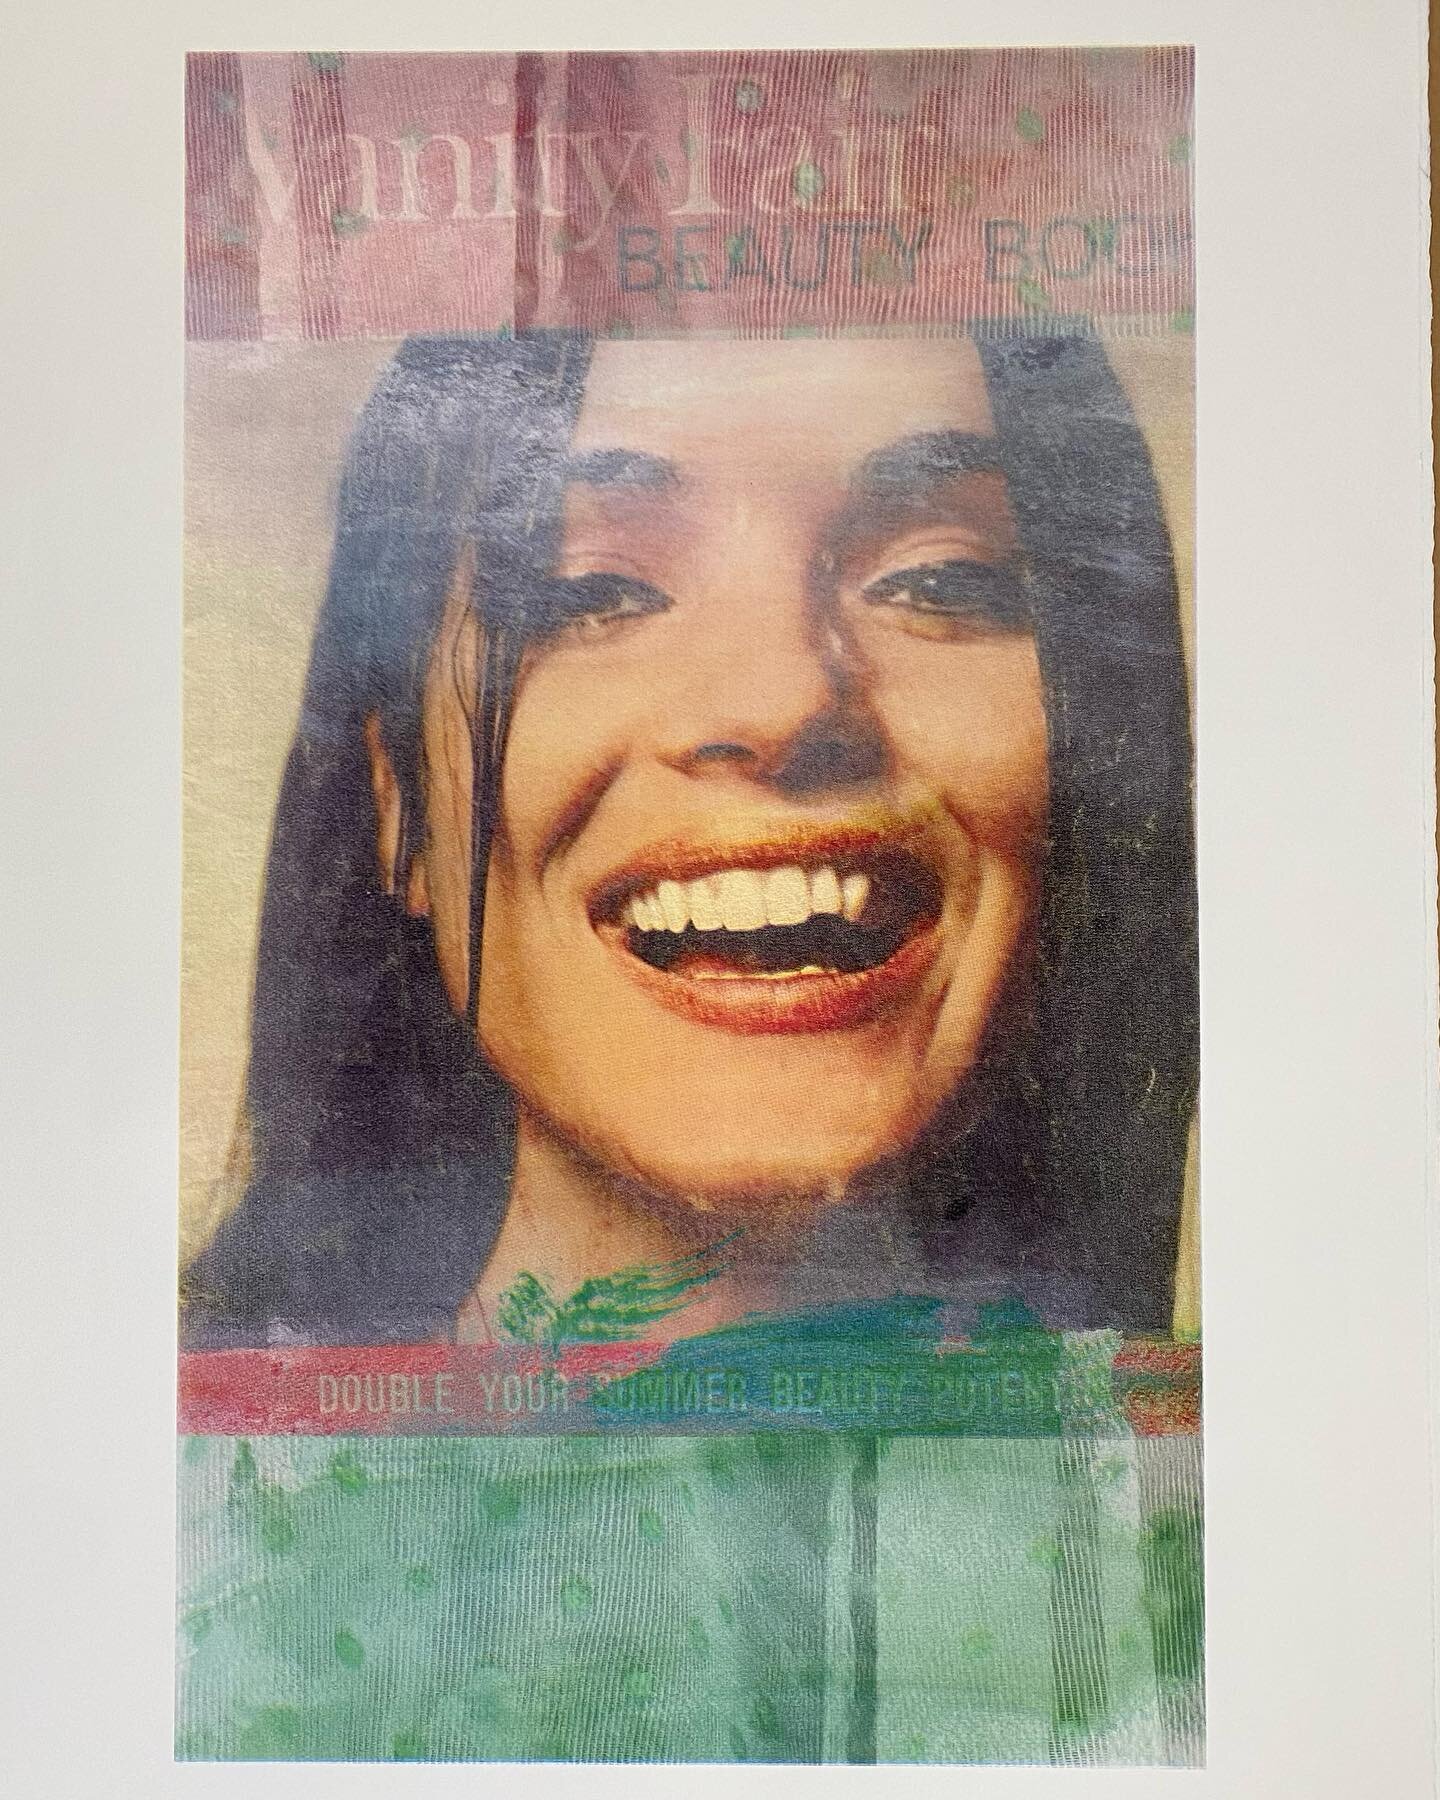 Isn&rsquo;t she lovely? This screenprint is a photo collage of my dear friend Daniele Noel Roux. It has elements and layers of stories we have shared. The swinging sixties in London, where she was discovered on the street by the prominent photographe